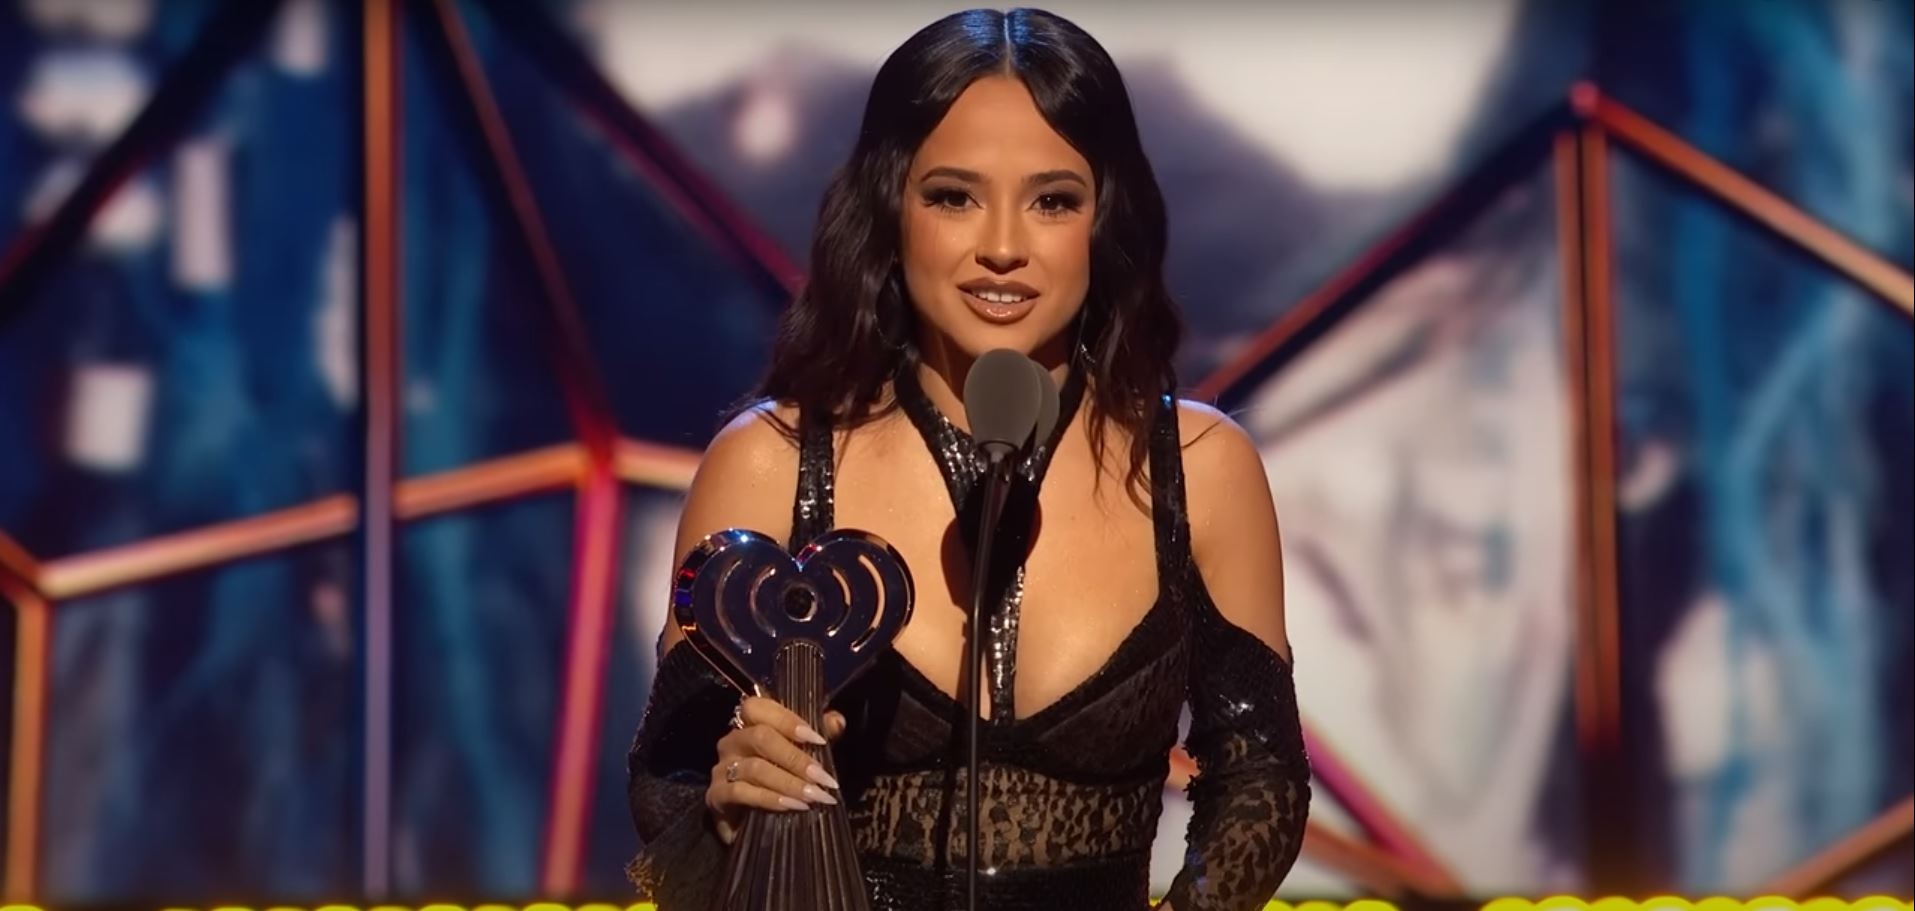 Becky G g wears a neckline with a horn and gives a tremendous speech